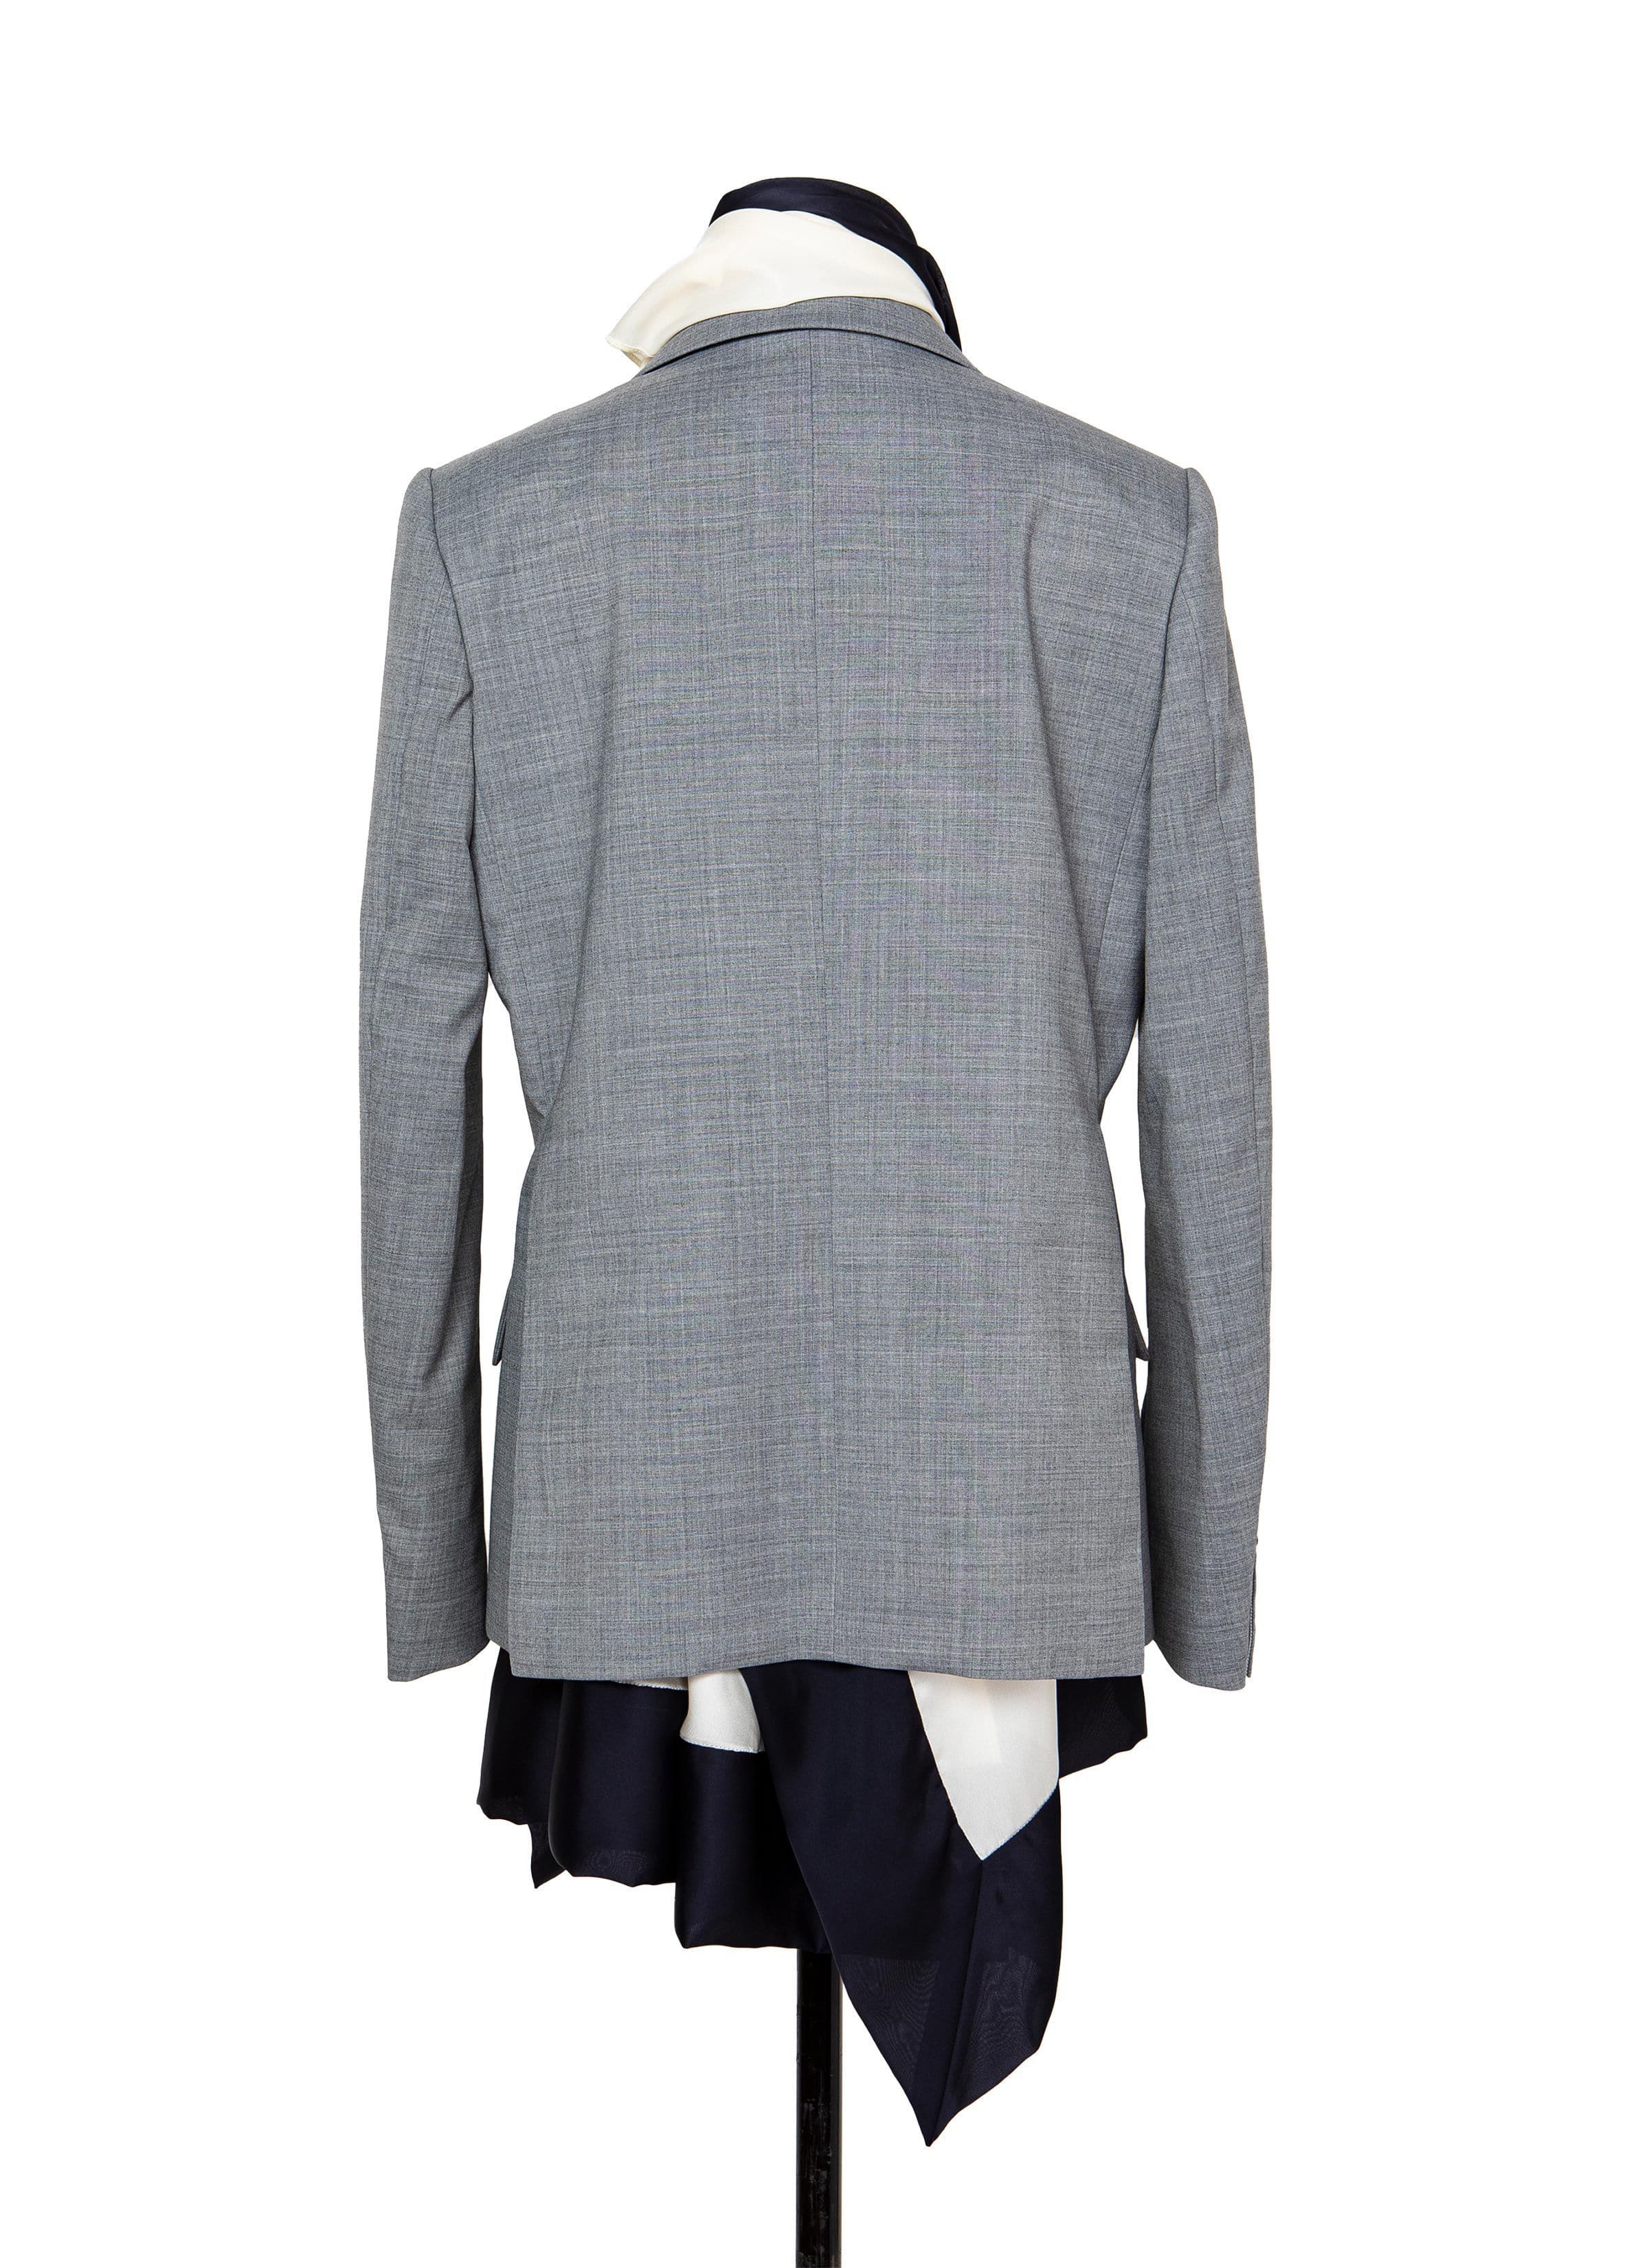 Suiting Mix Jacket 詳細画像 L/GRAY 3